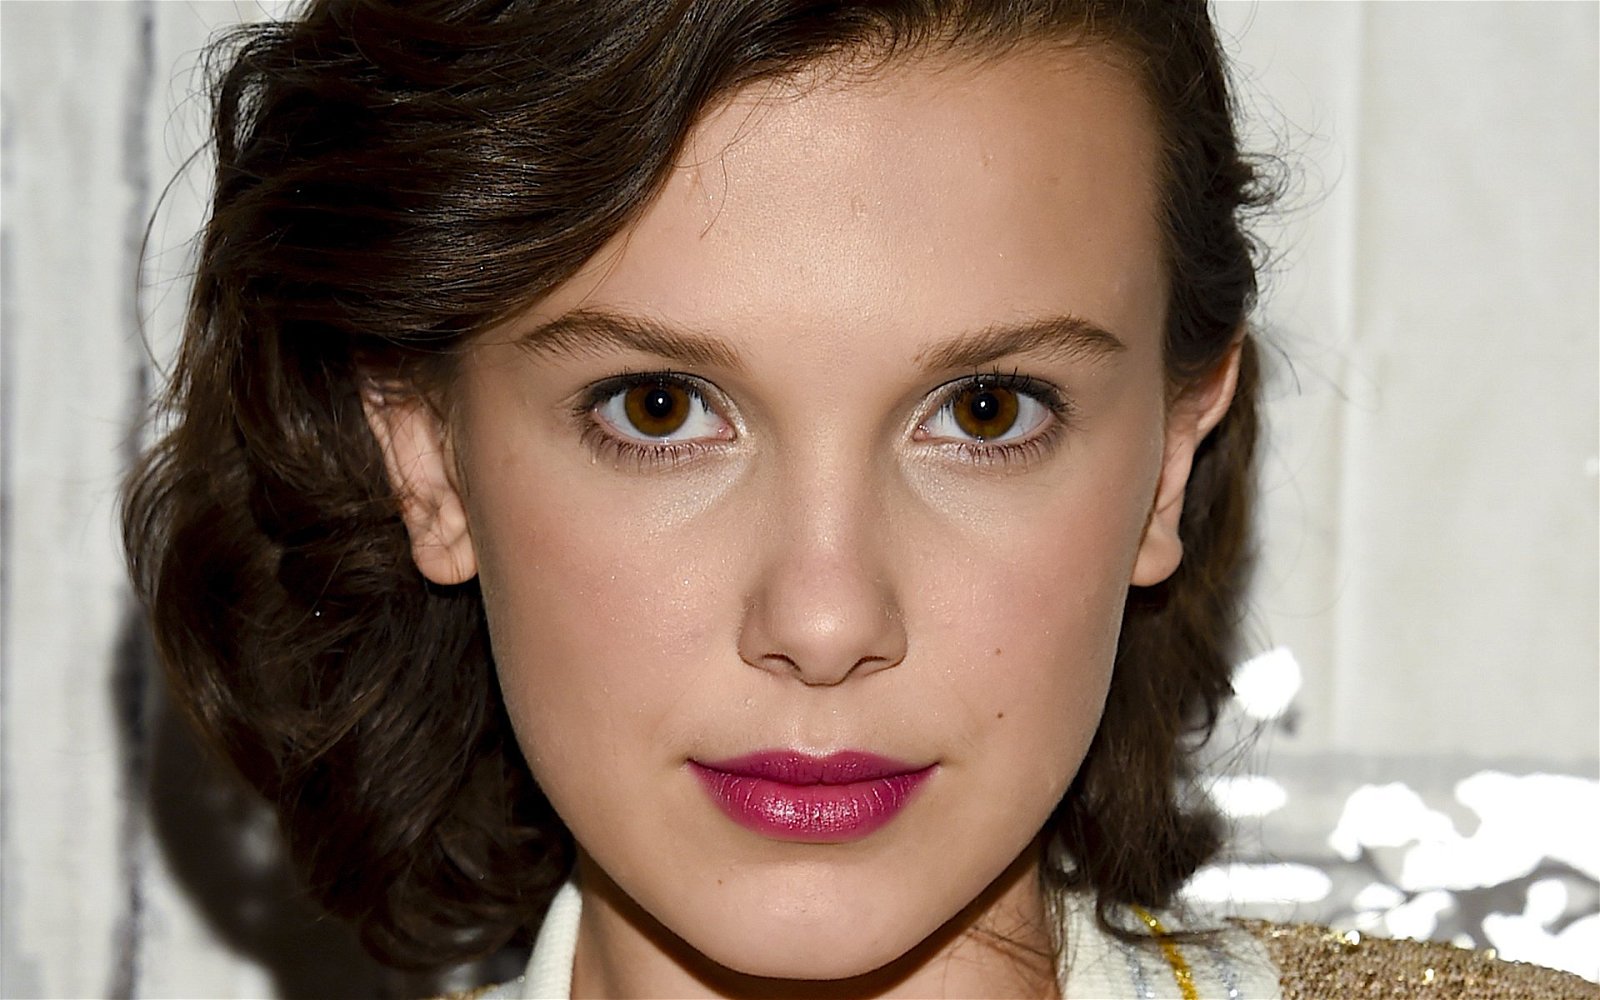 Millie Bobby Brown Was Just Named Louis Vuitton's Newest Ambassador